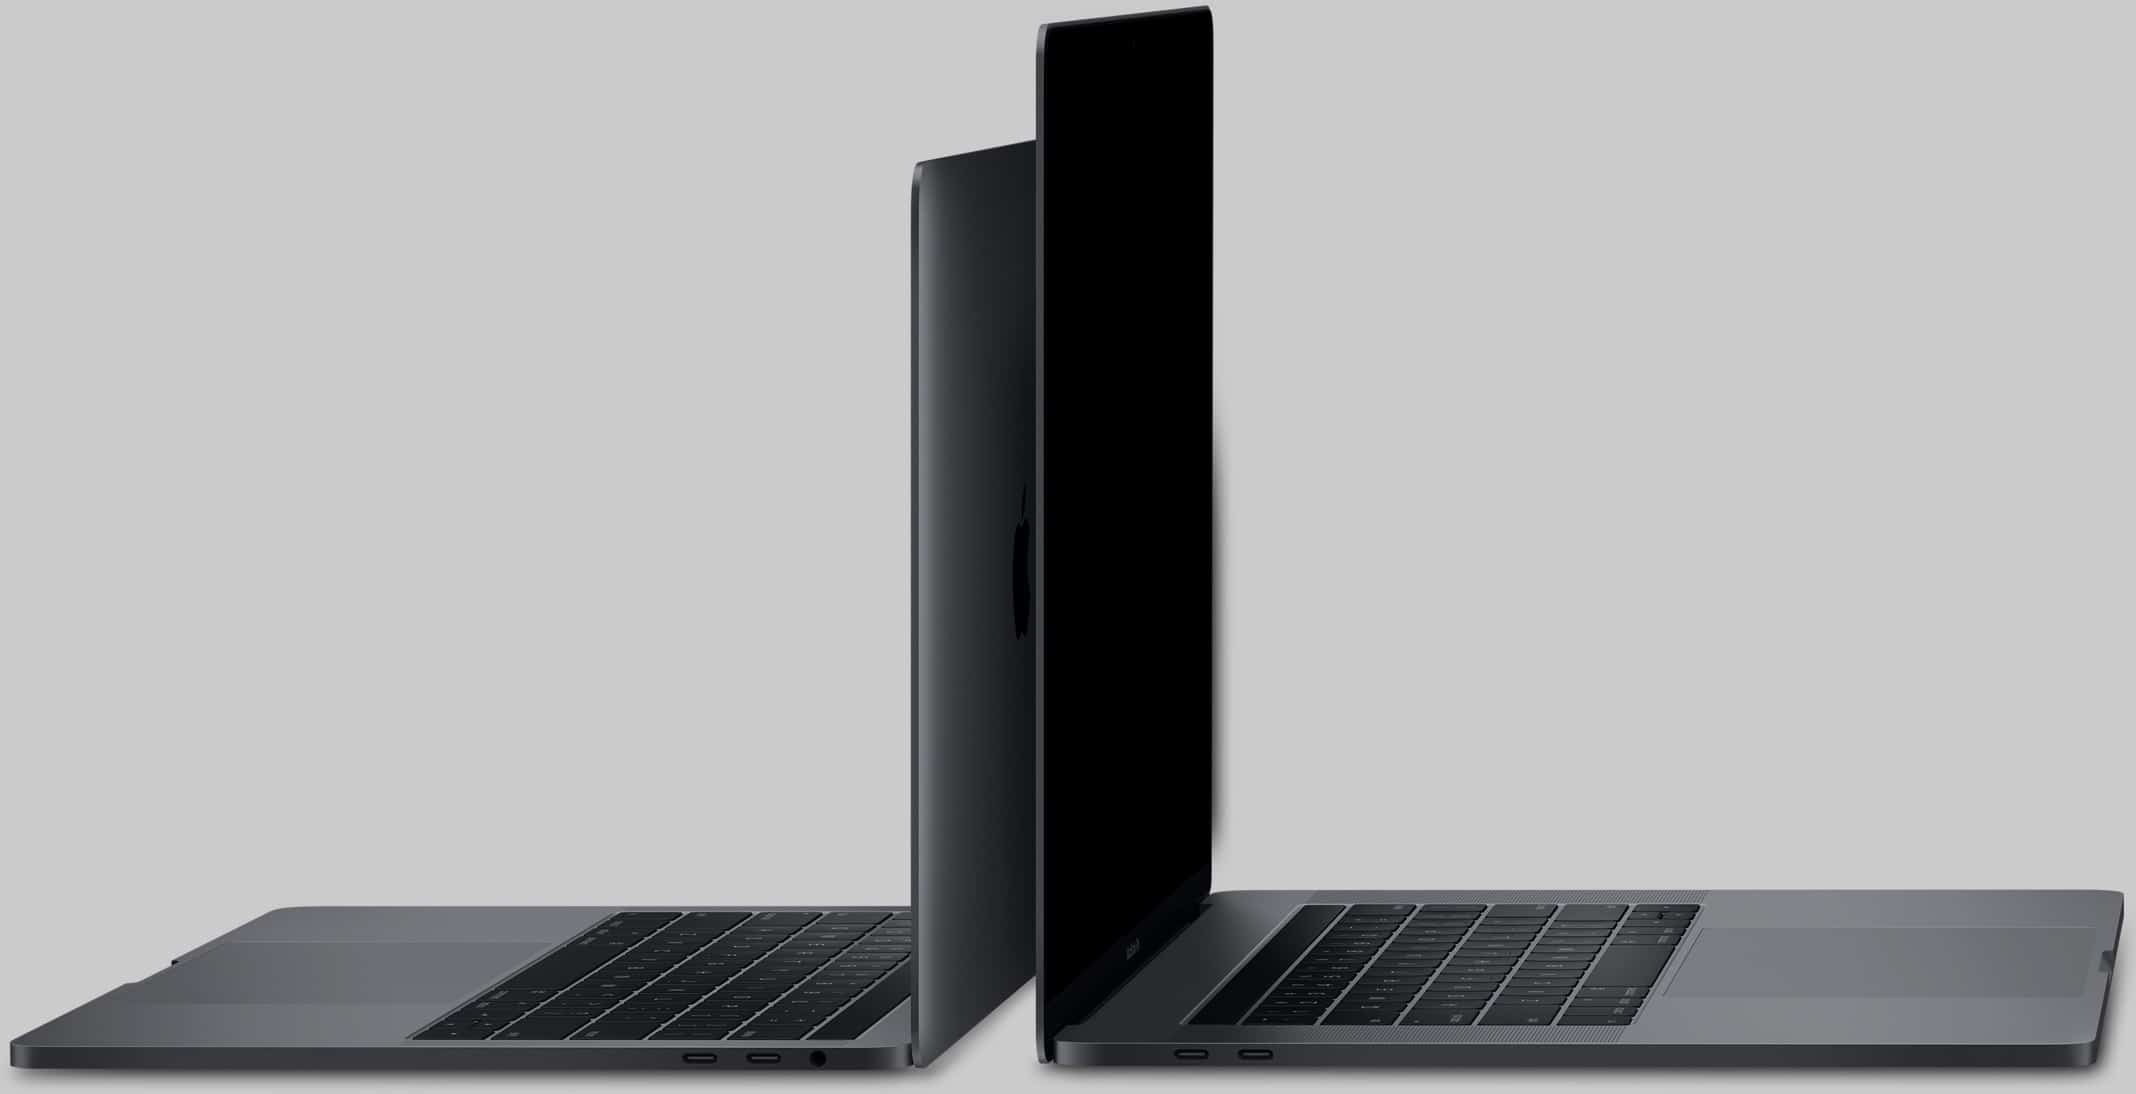 There's a MacBook Pro keyboard design in the models introduced today.